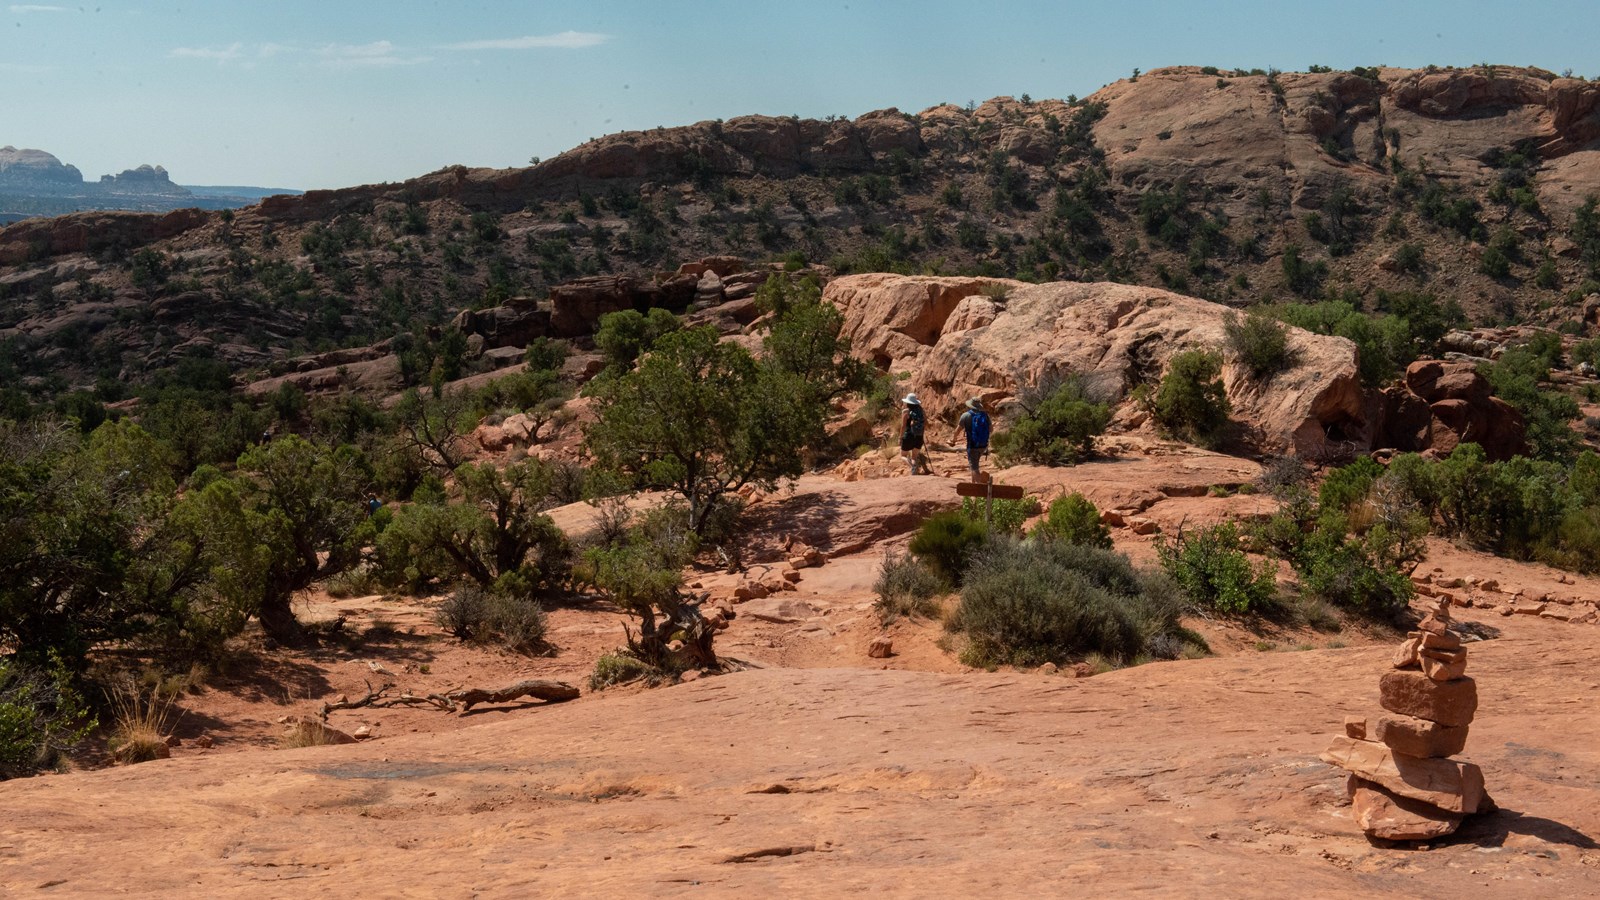 Stacked rocks guide two hikers across sandstone and juniper trees